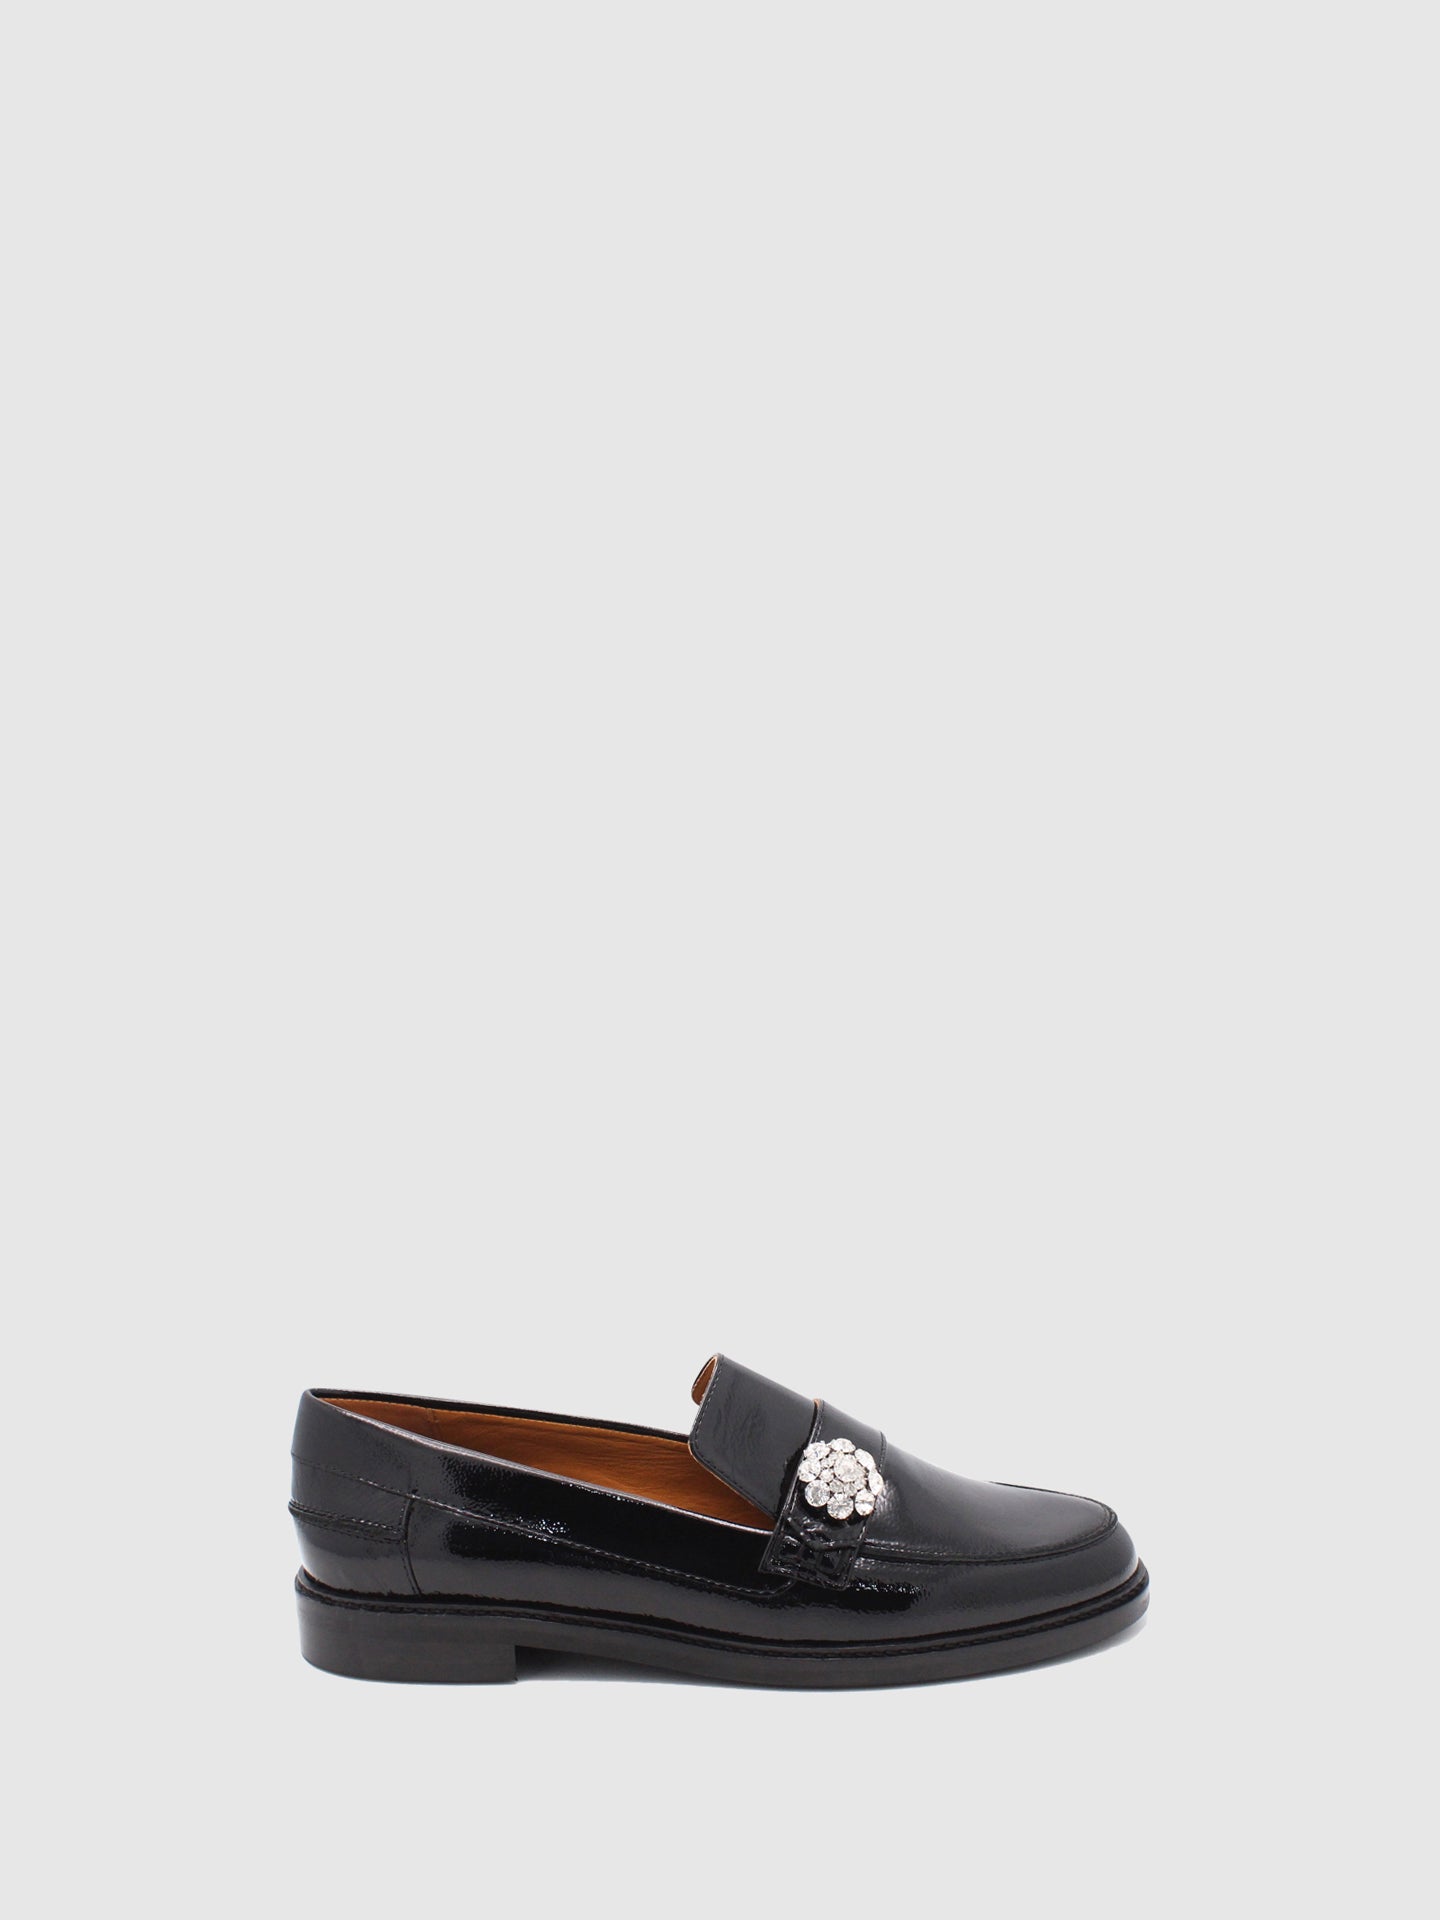 JJ Heitor Classic Loafers